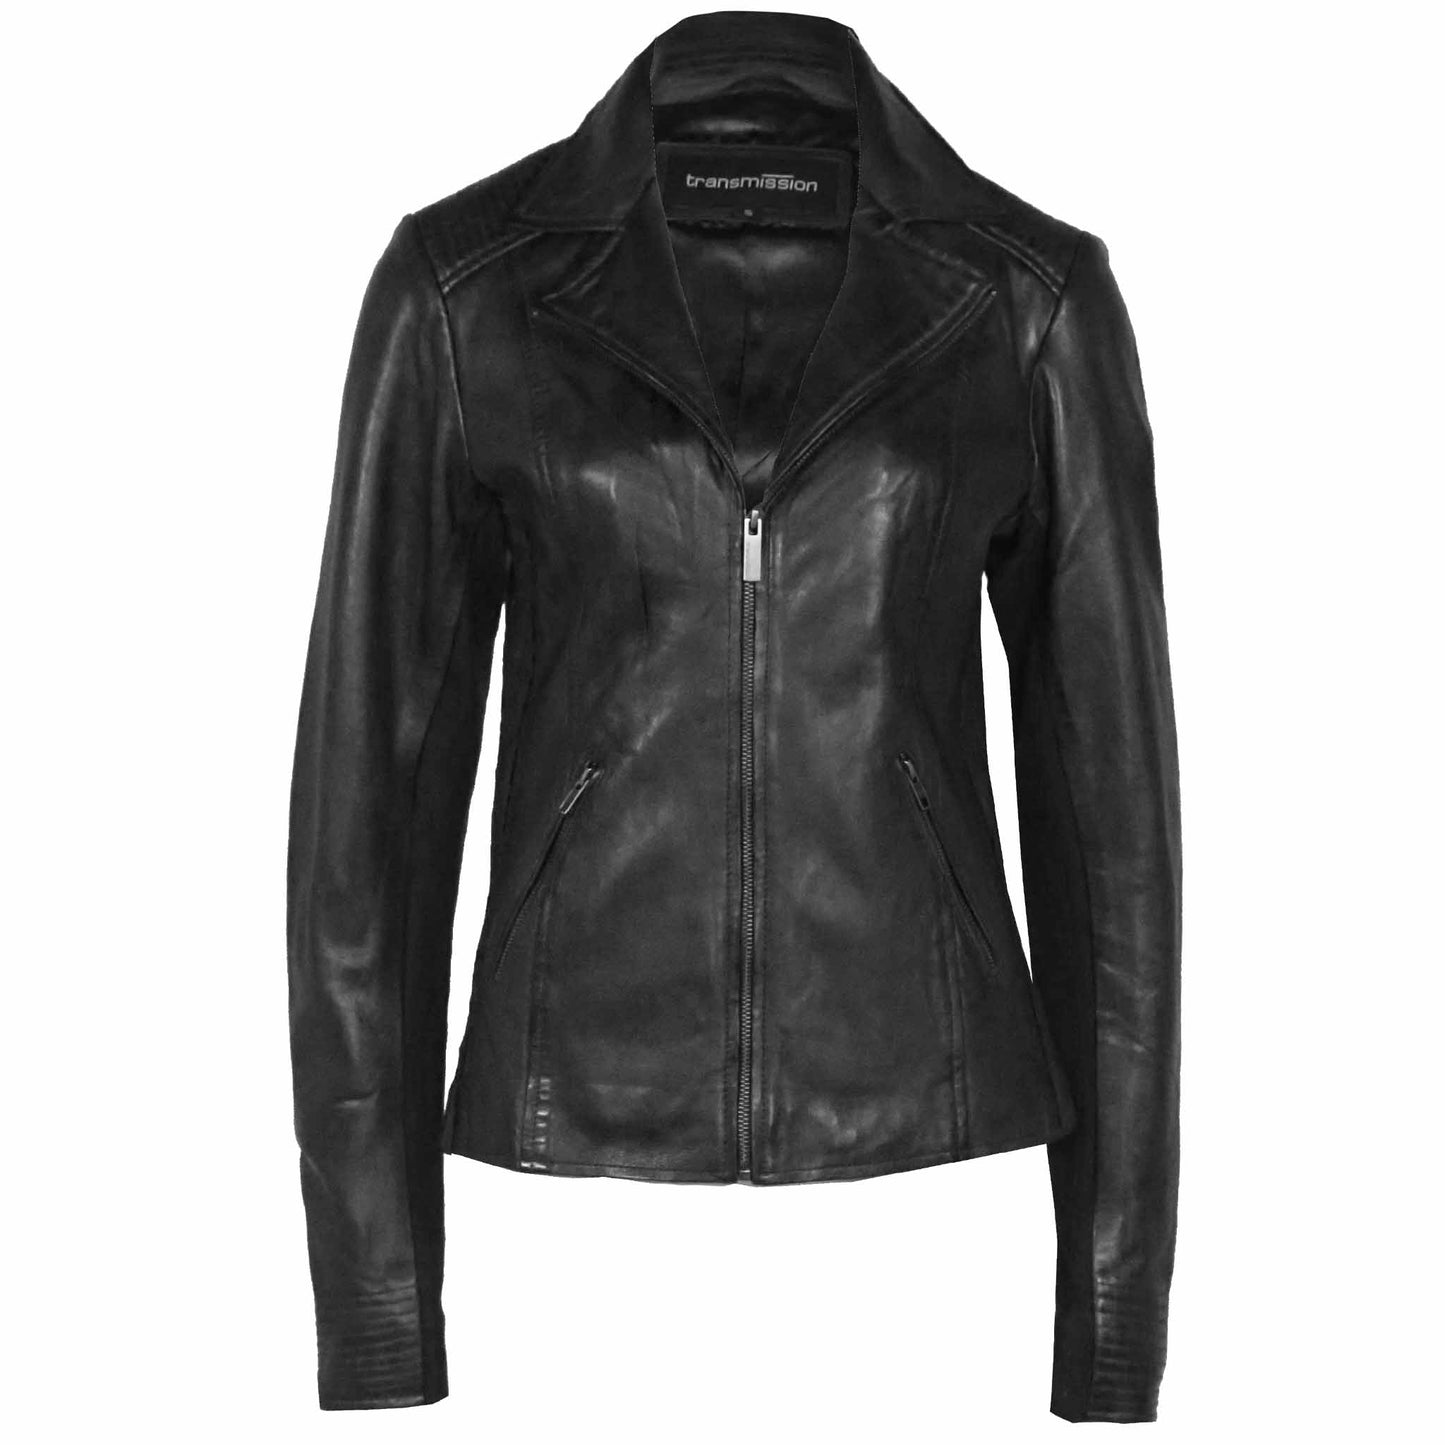 clothing tall women transmission jack leather will